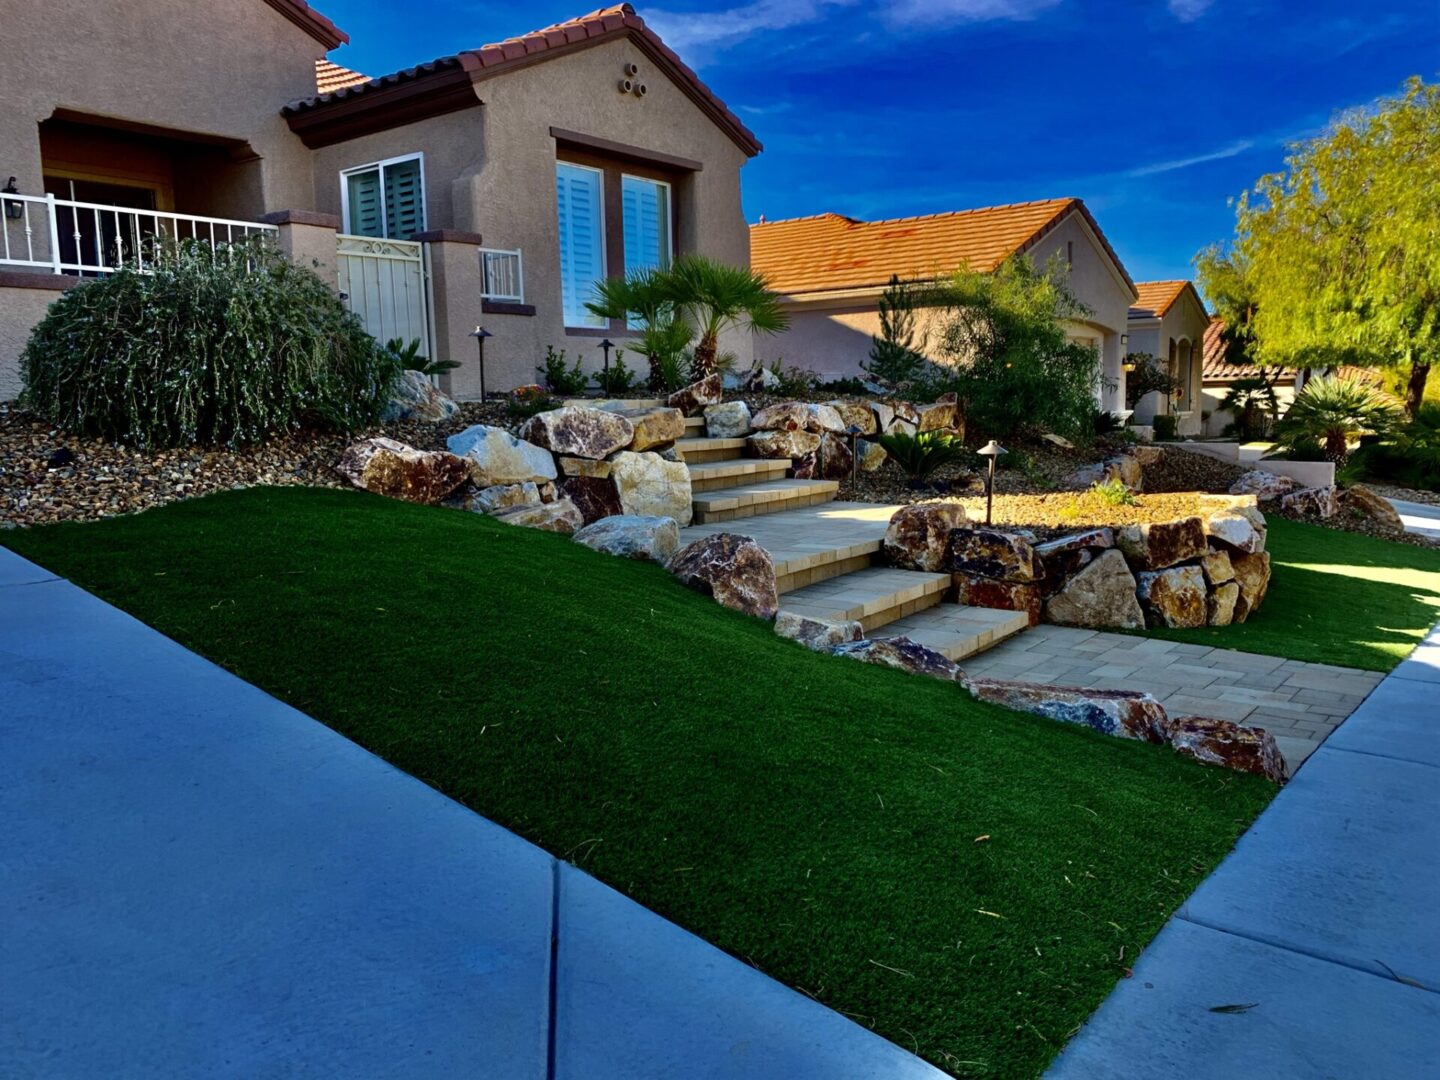 A yard with grass and rocks in the background.